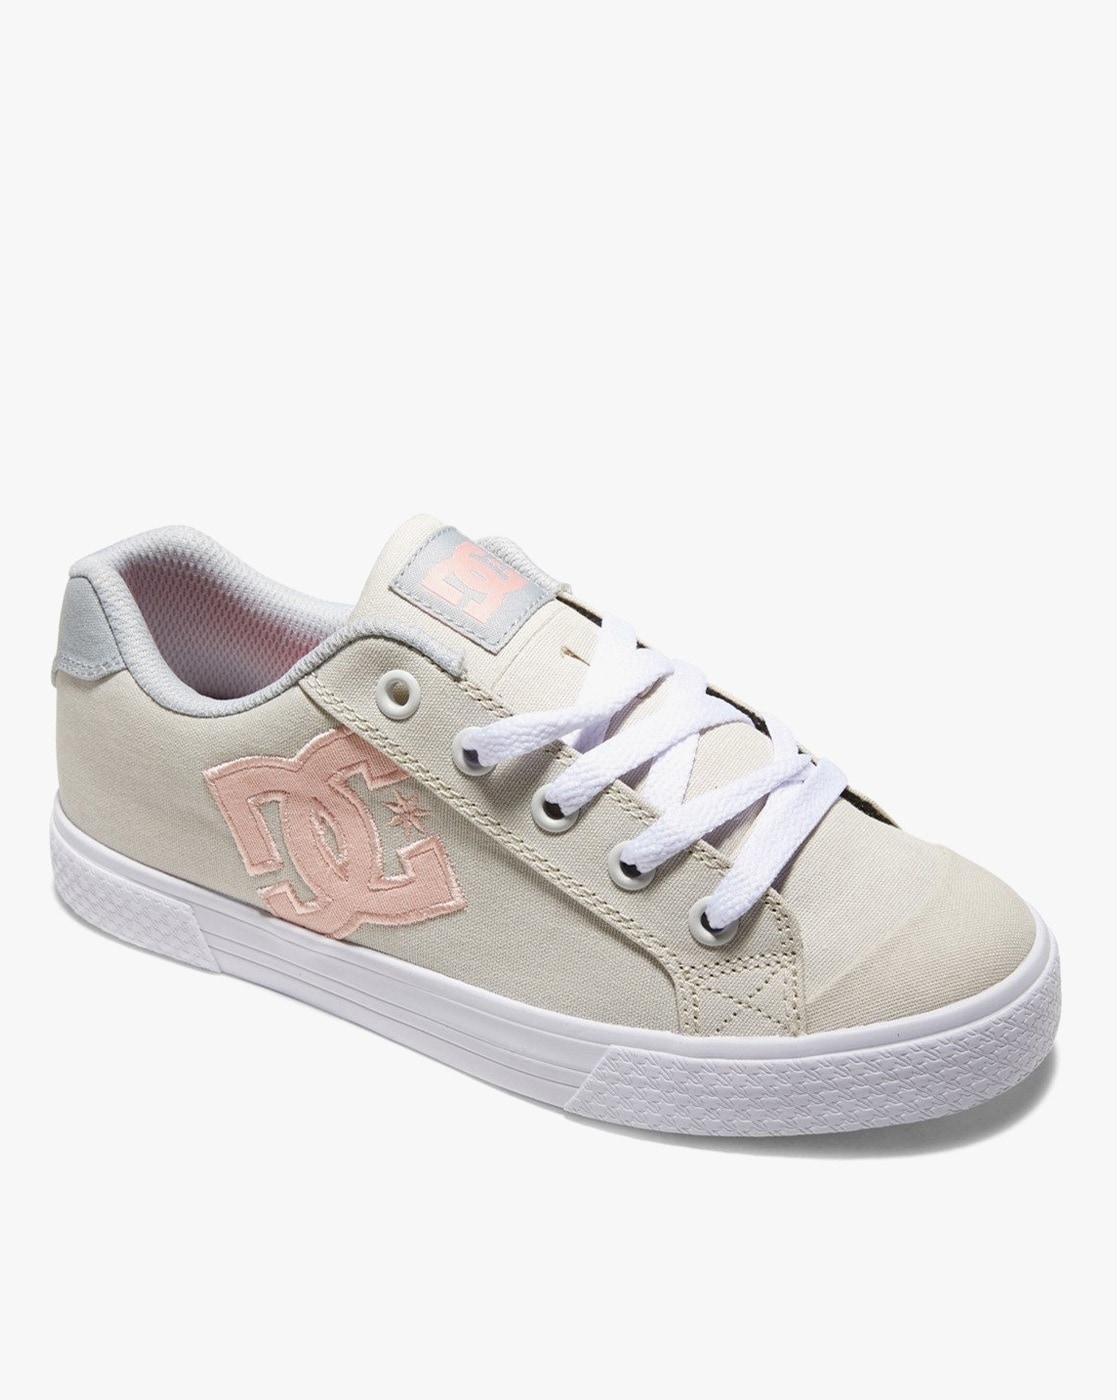 Buy Off White & Pink Casual Shoes for Women by DC Shoes Online 